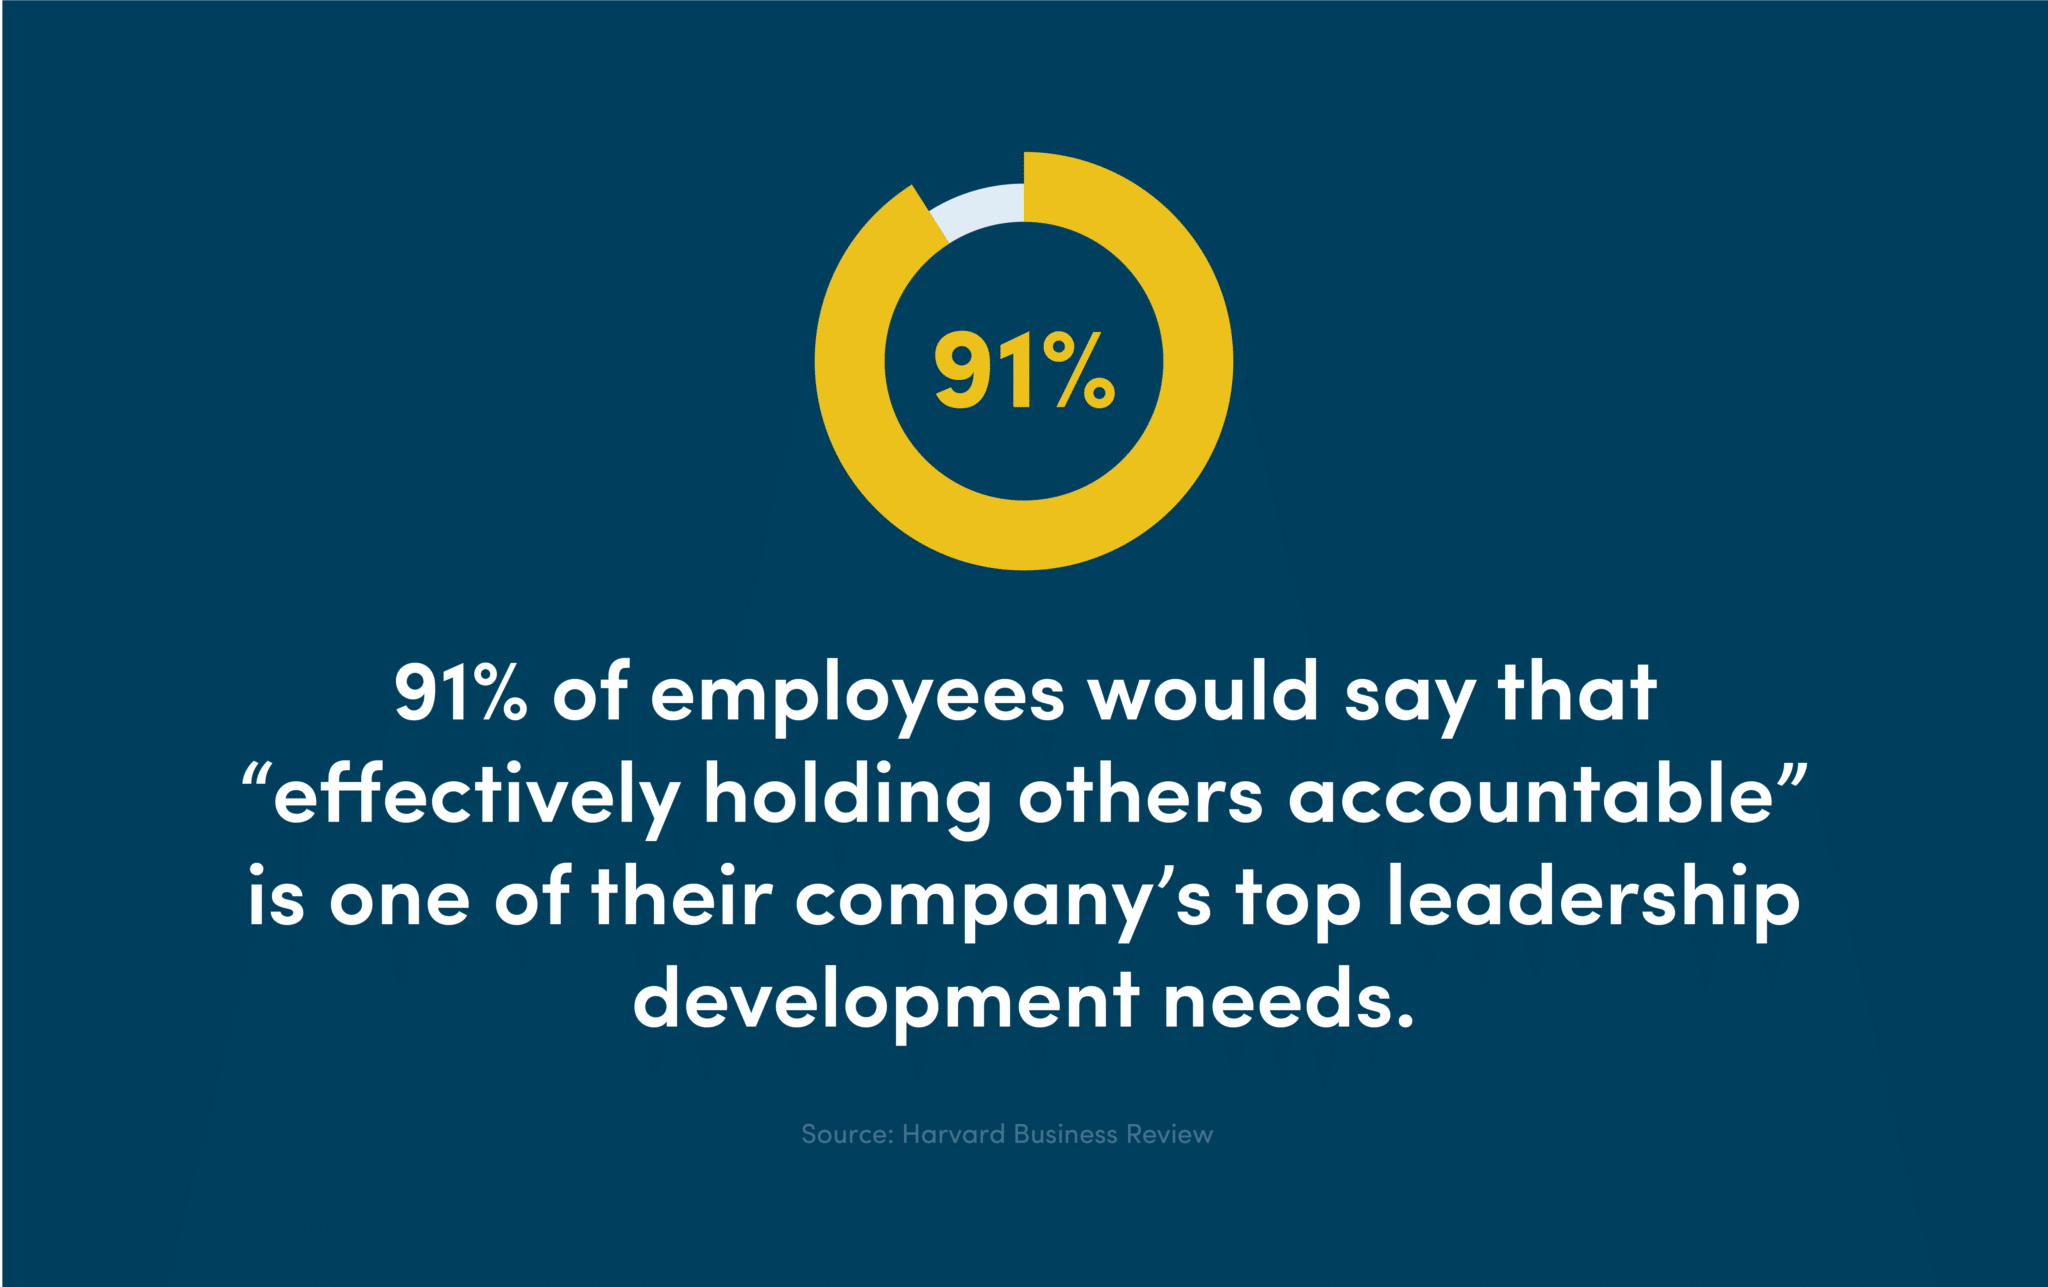 91% of employees would say that “effectively holding others accountable” is one of their company’s top leadership development needs.